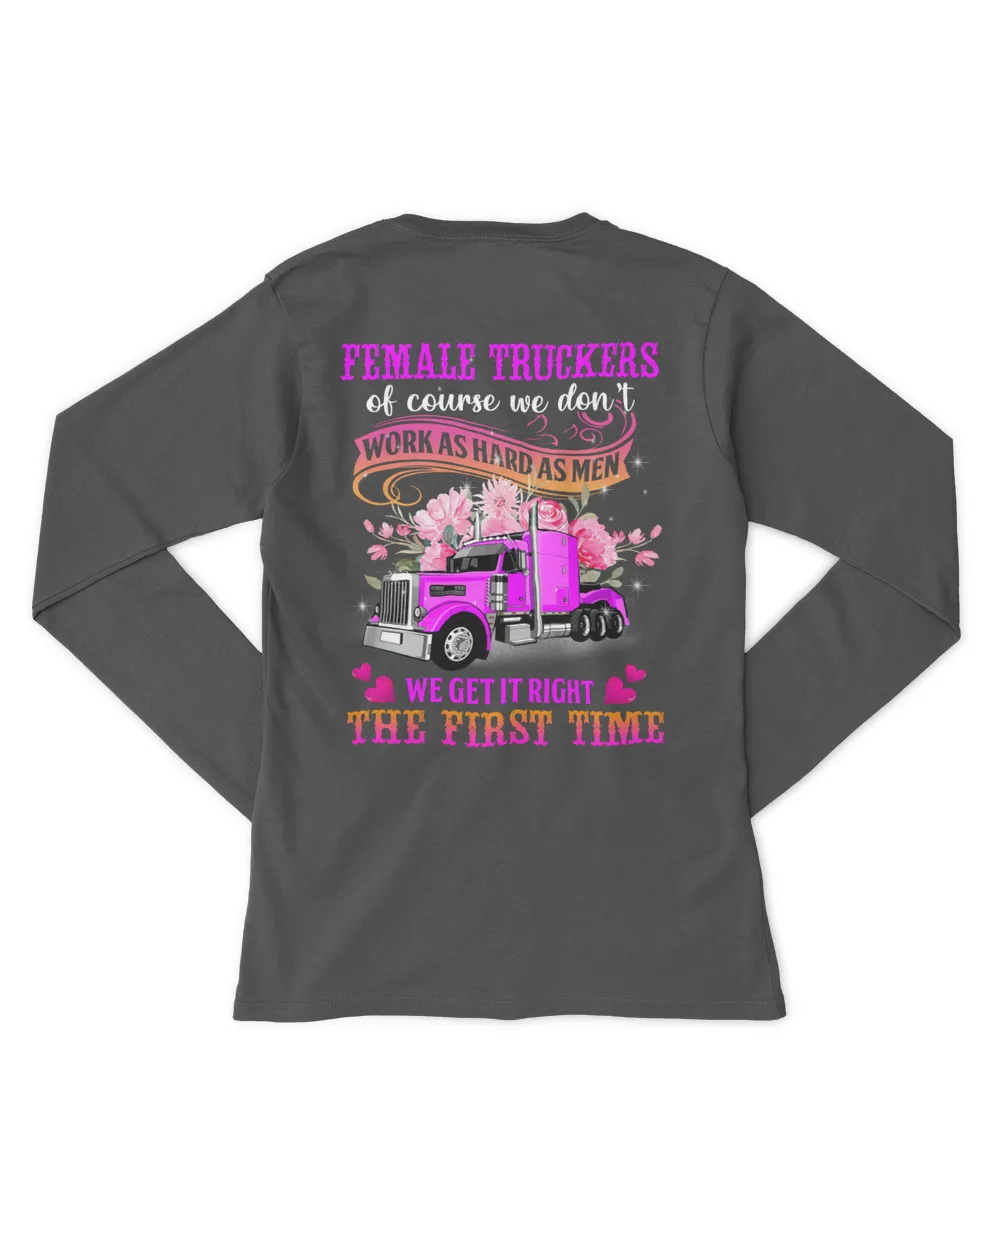 Female truckers of course we don't work as hard as men we get it right the first time